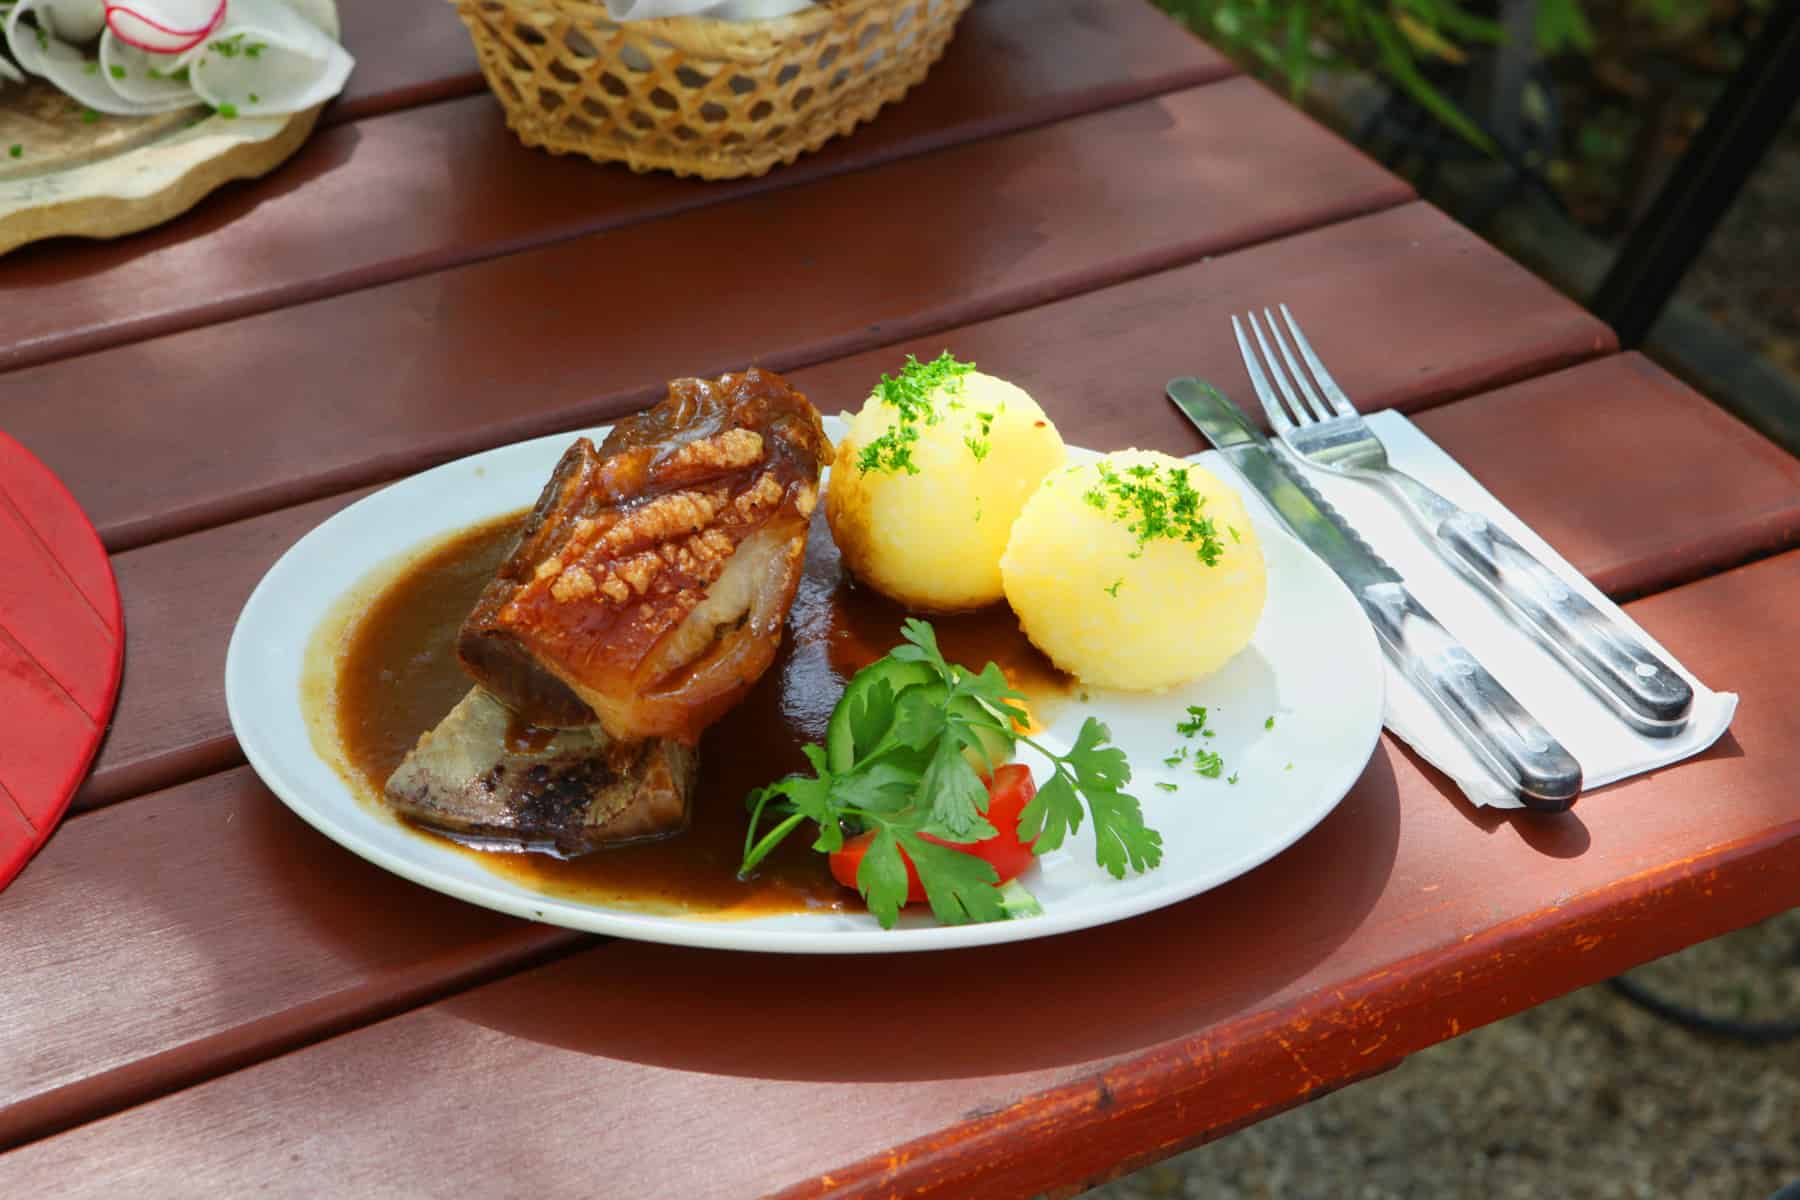 The cooked pork shoulder meat dish known as Fränkisches Schäufele in Nuremberg, serves with two potato dumplings, gravy and a garnish of red and green salad